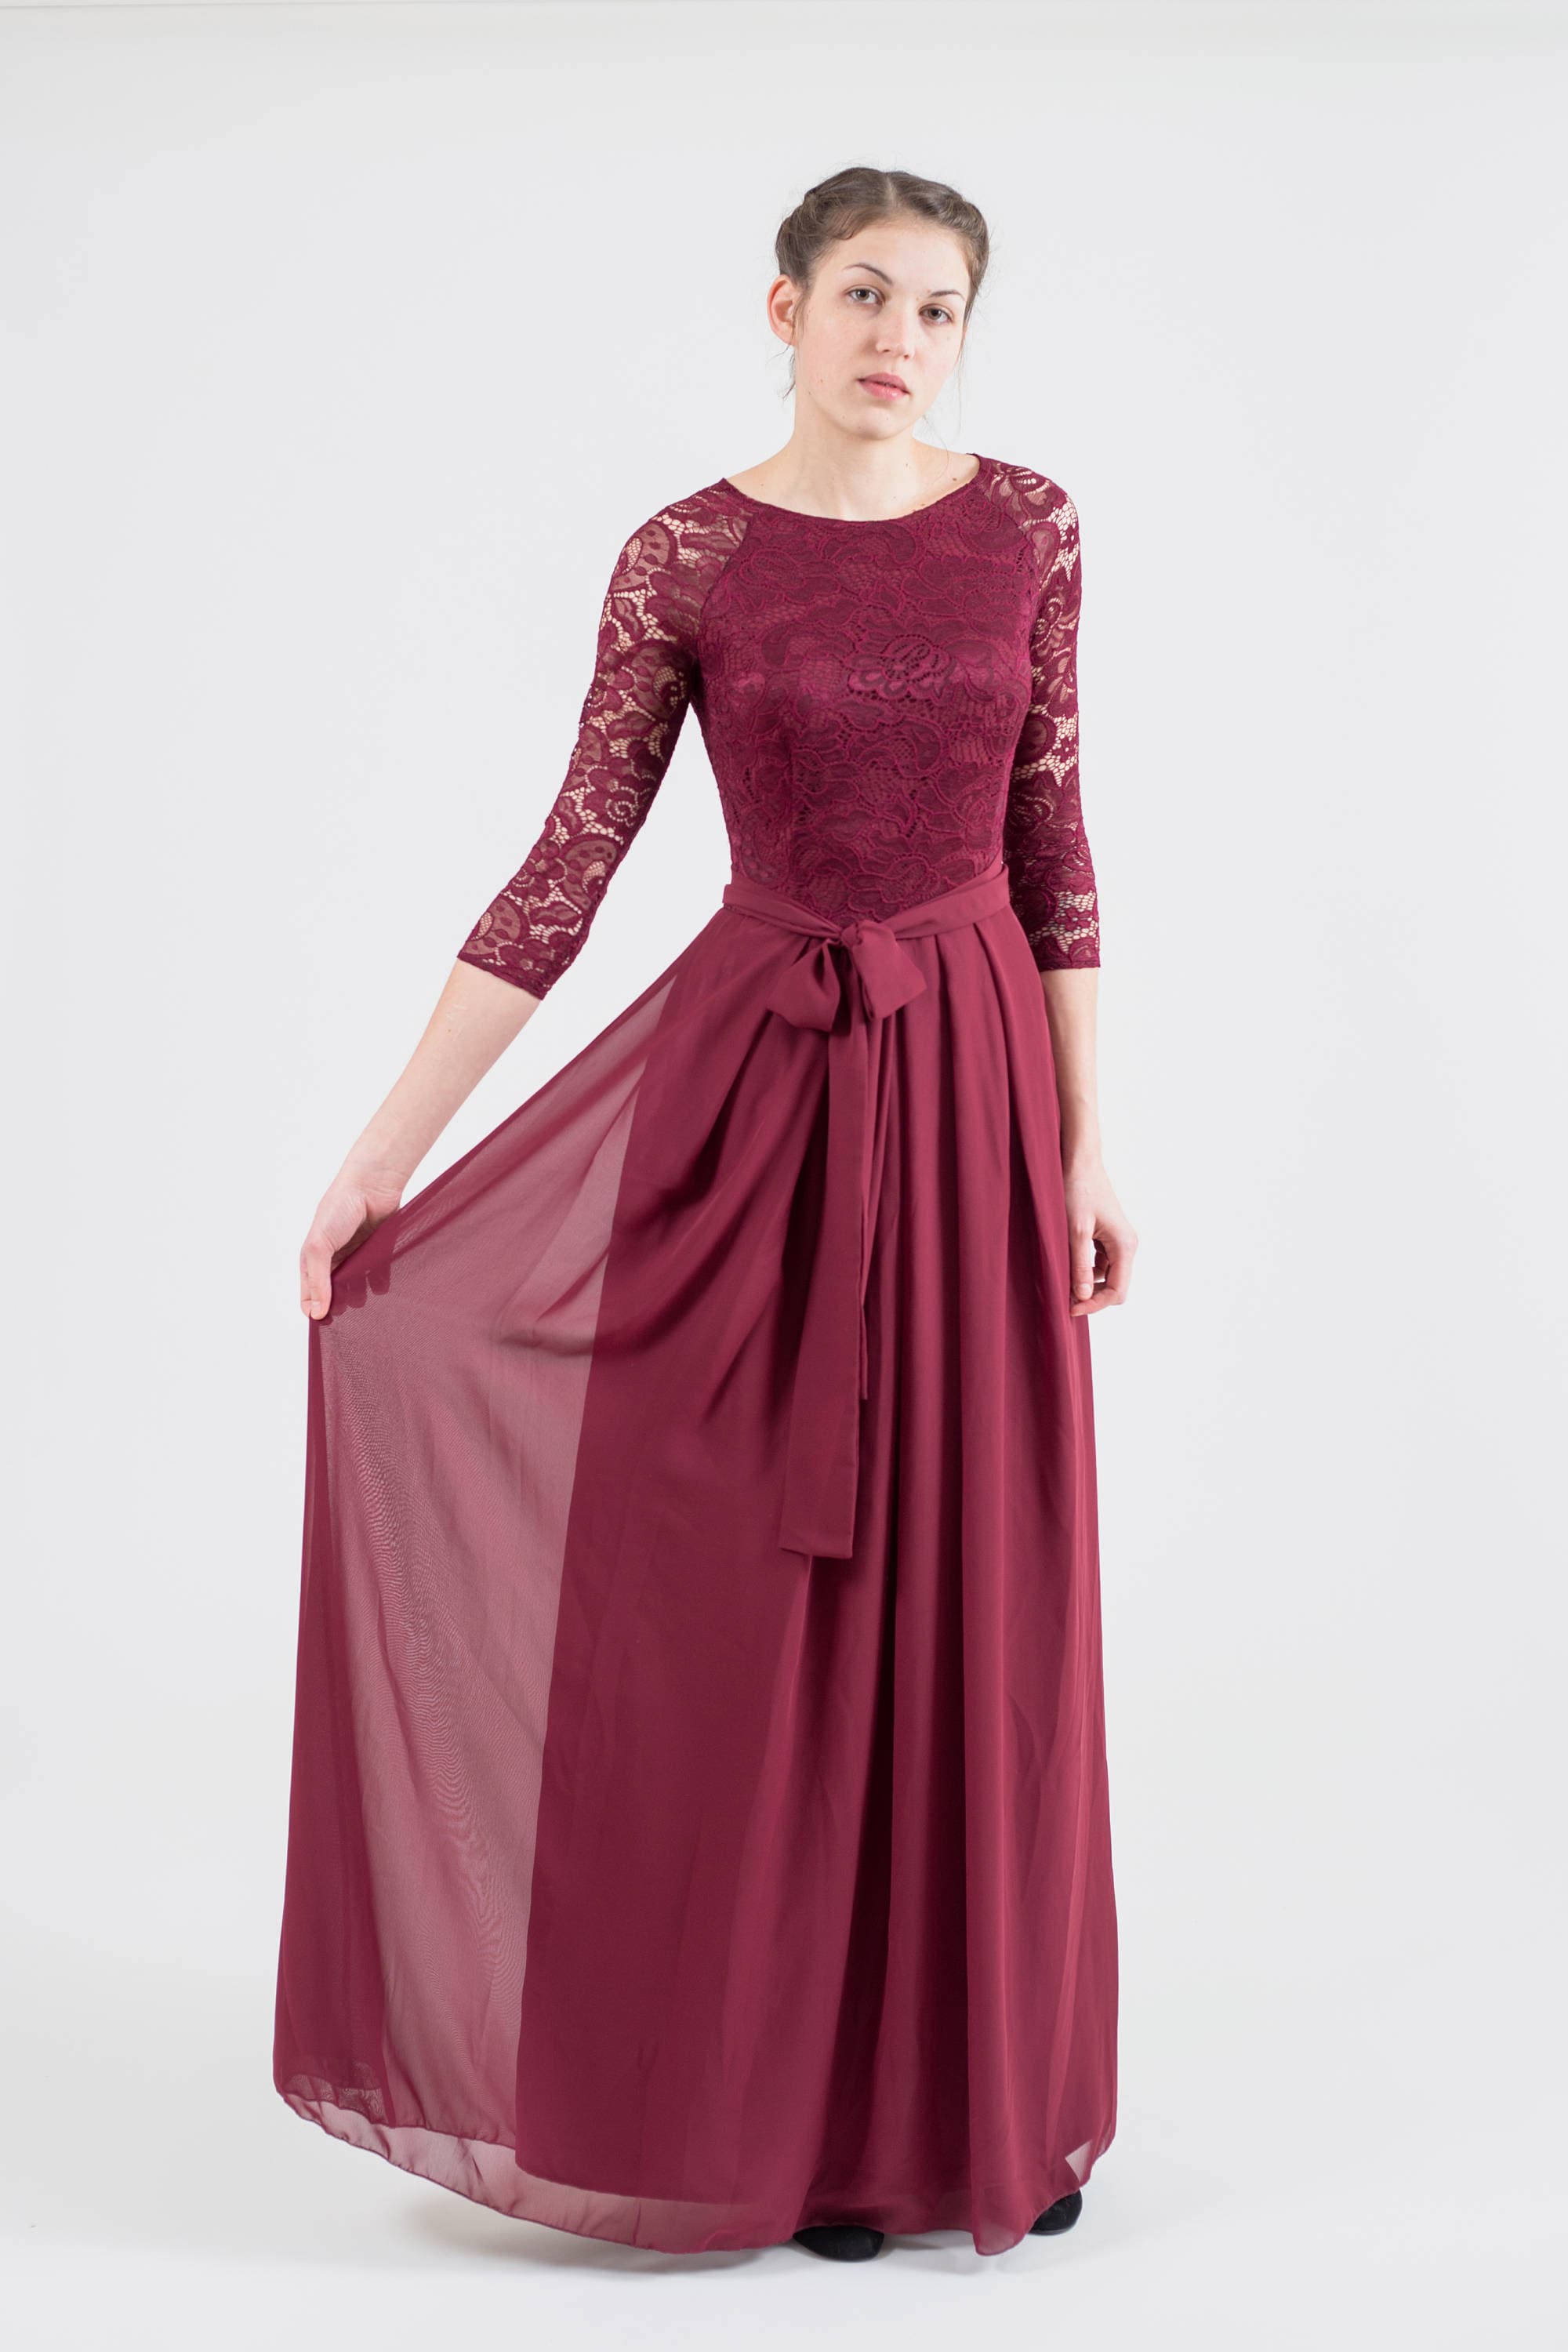 Long Burgundy Bridesmaid Dress With Sleeves Modest Lace Etsy